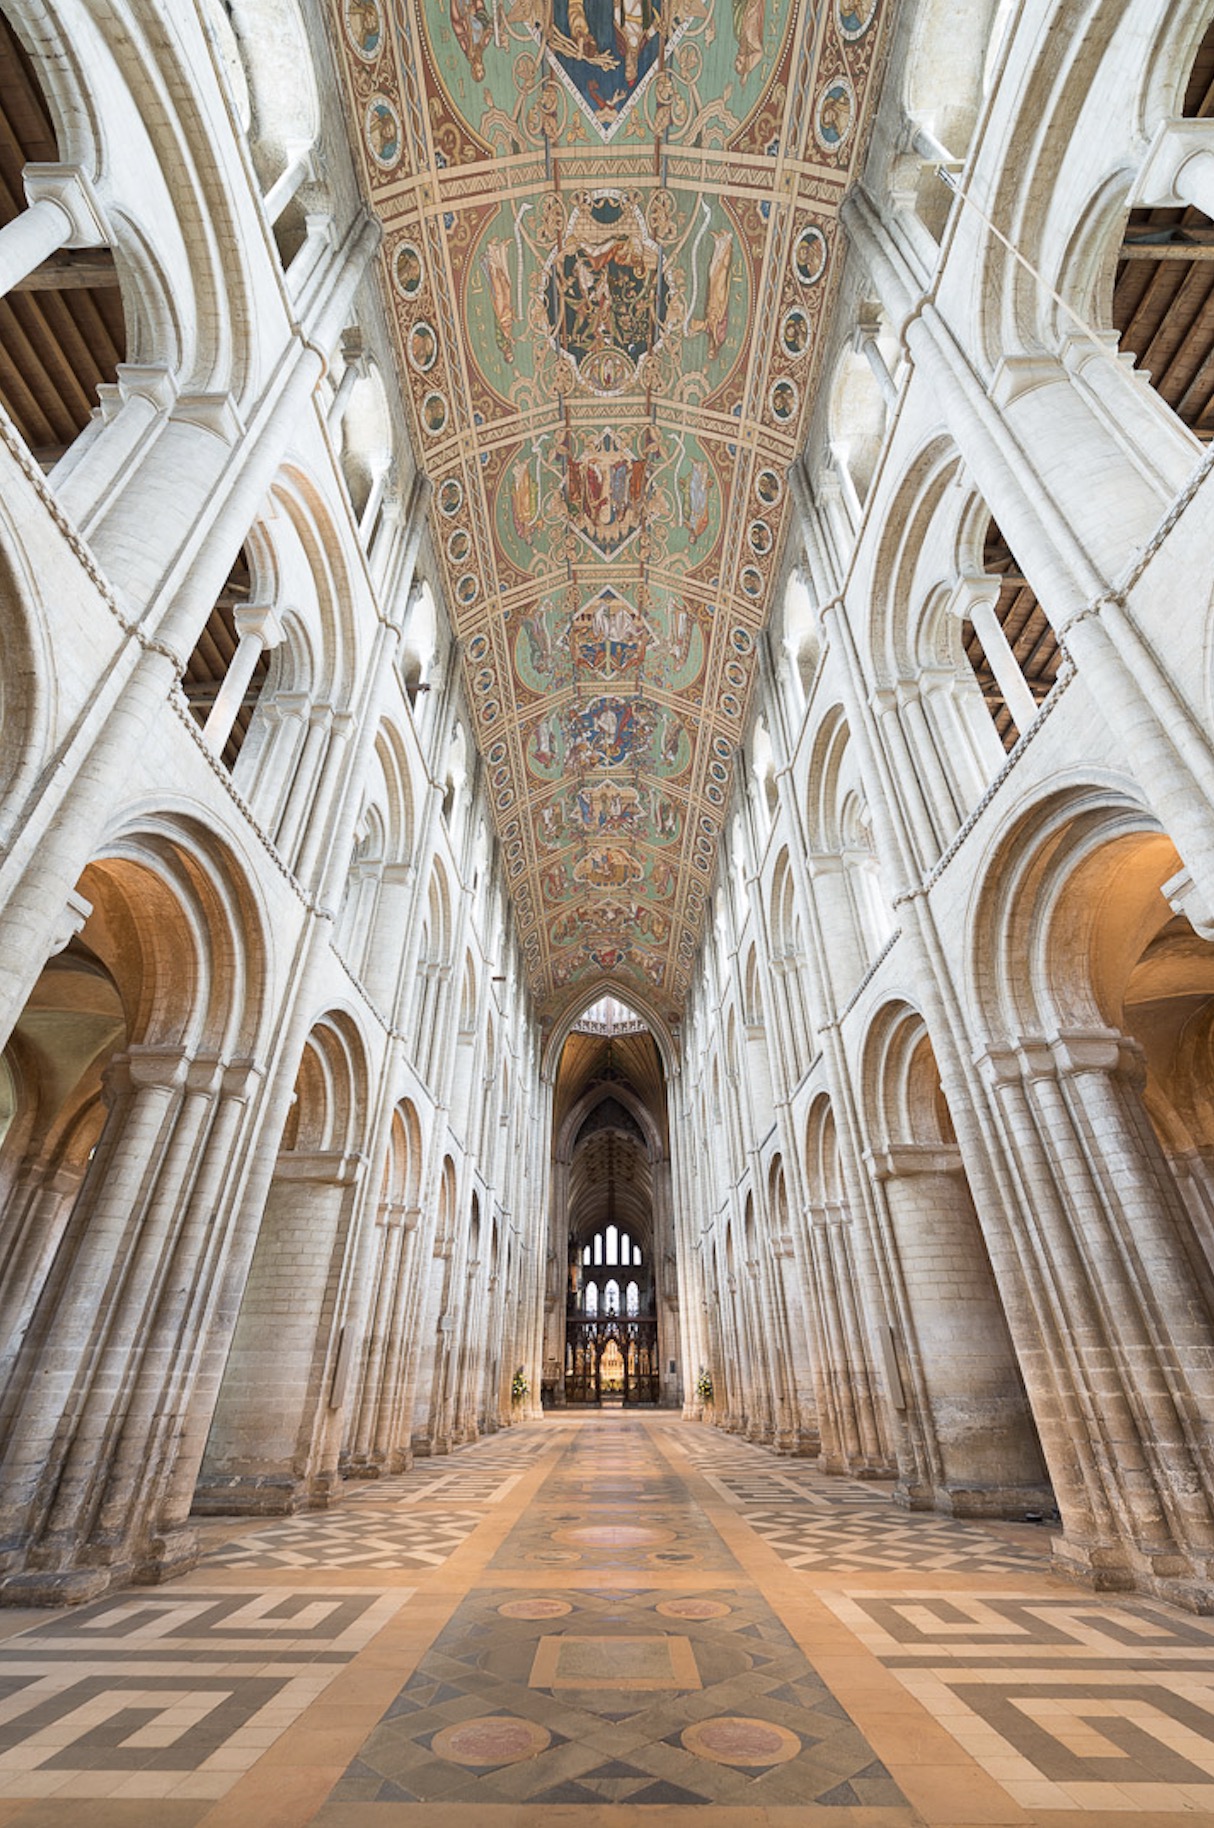 Ely Cathedral Ceiling - Always Look Up